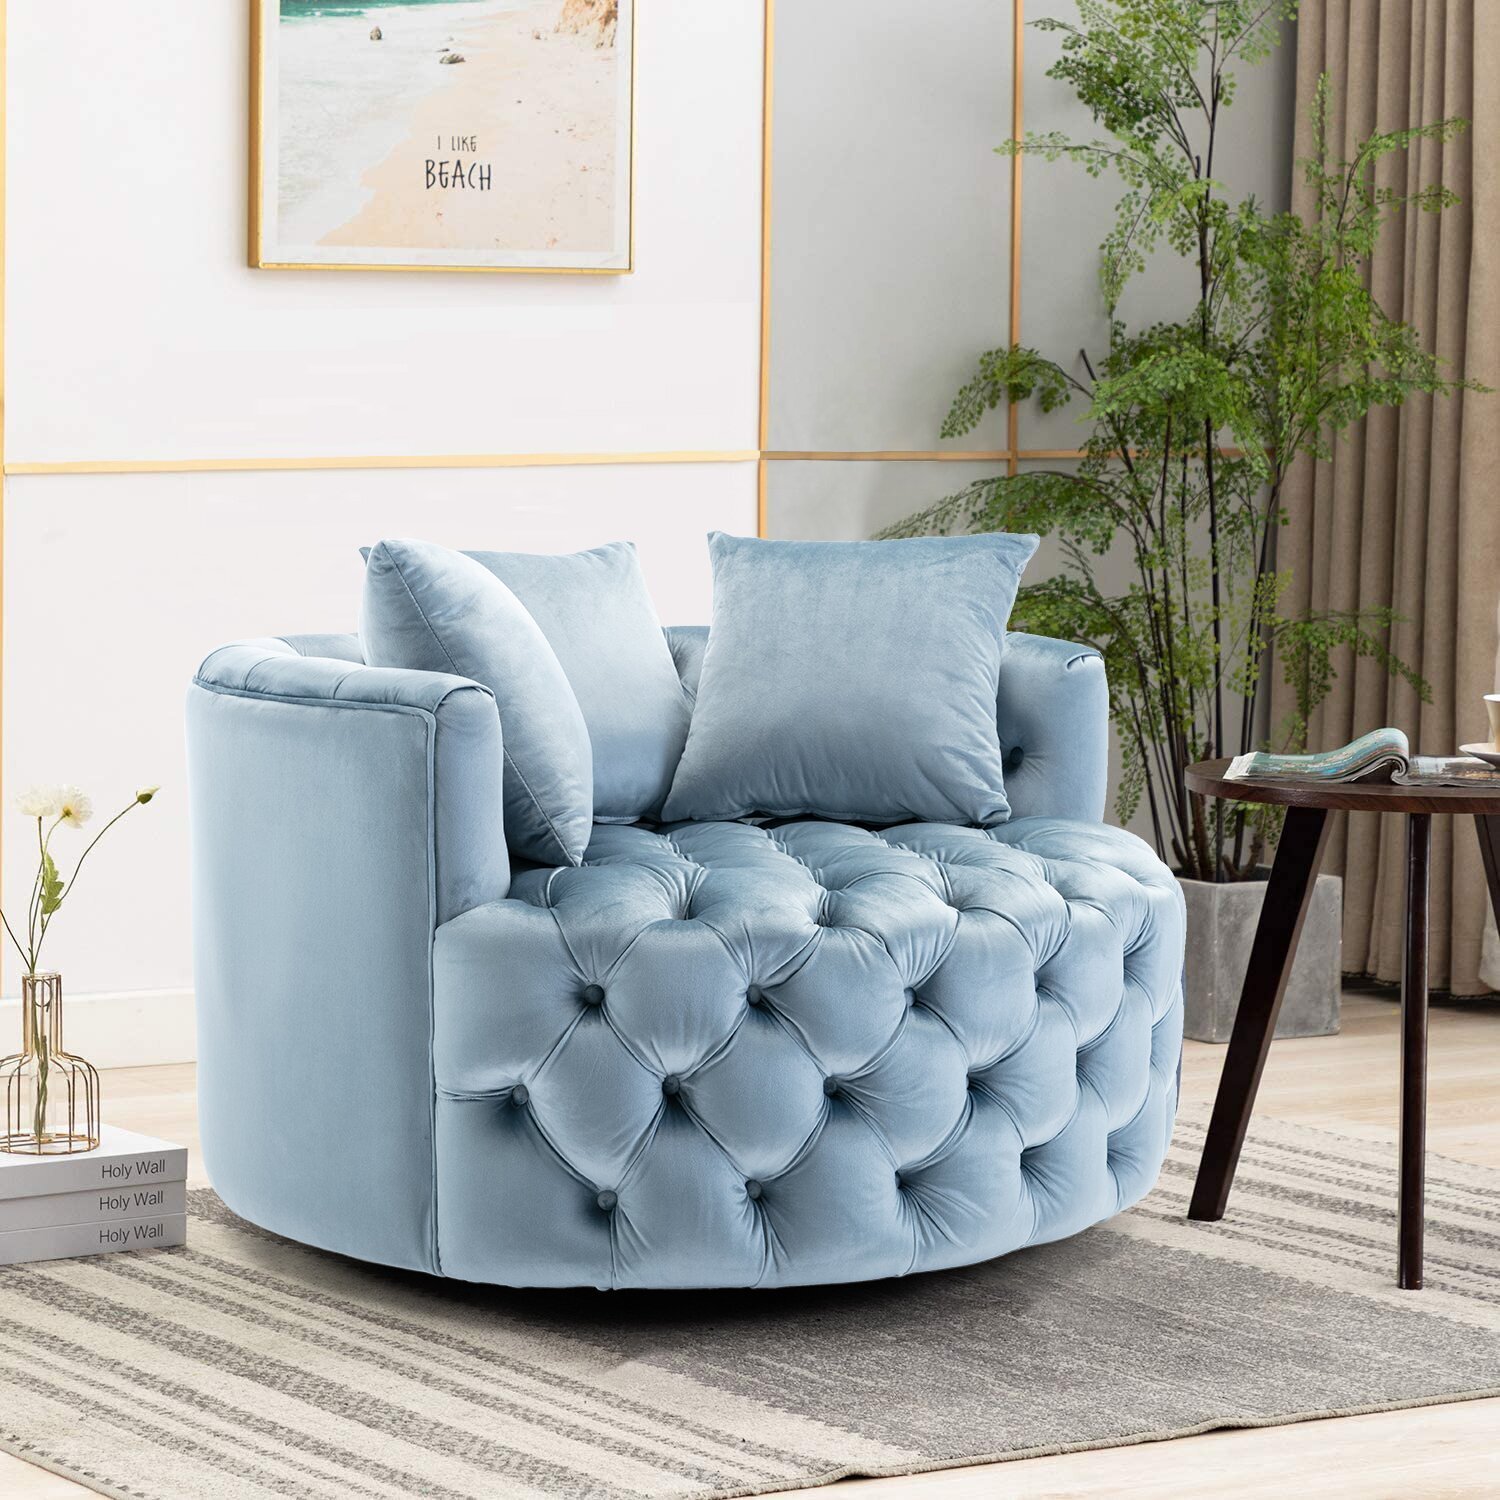 A tufted round swivel chair